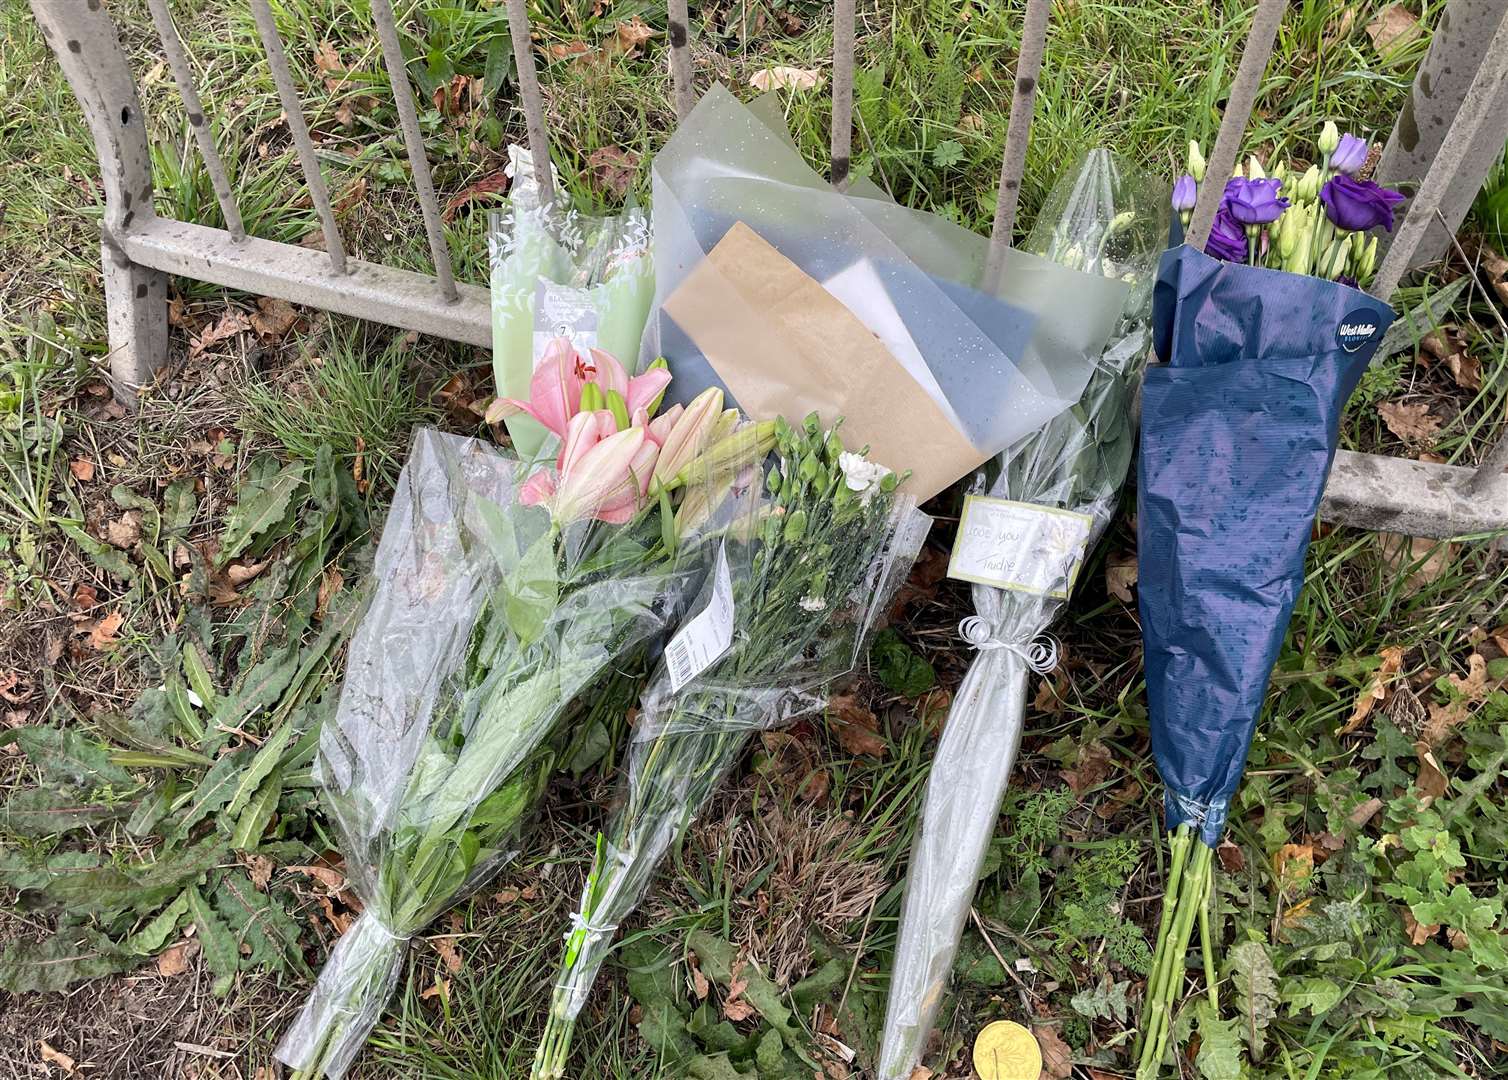 Floral tributes have been left for biker who died after colliding with traffic lights on the A228 Ashton Way